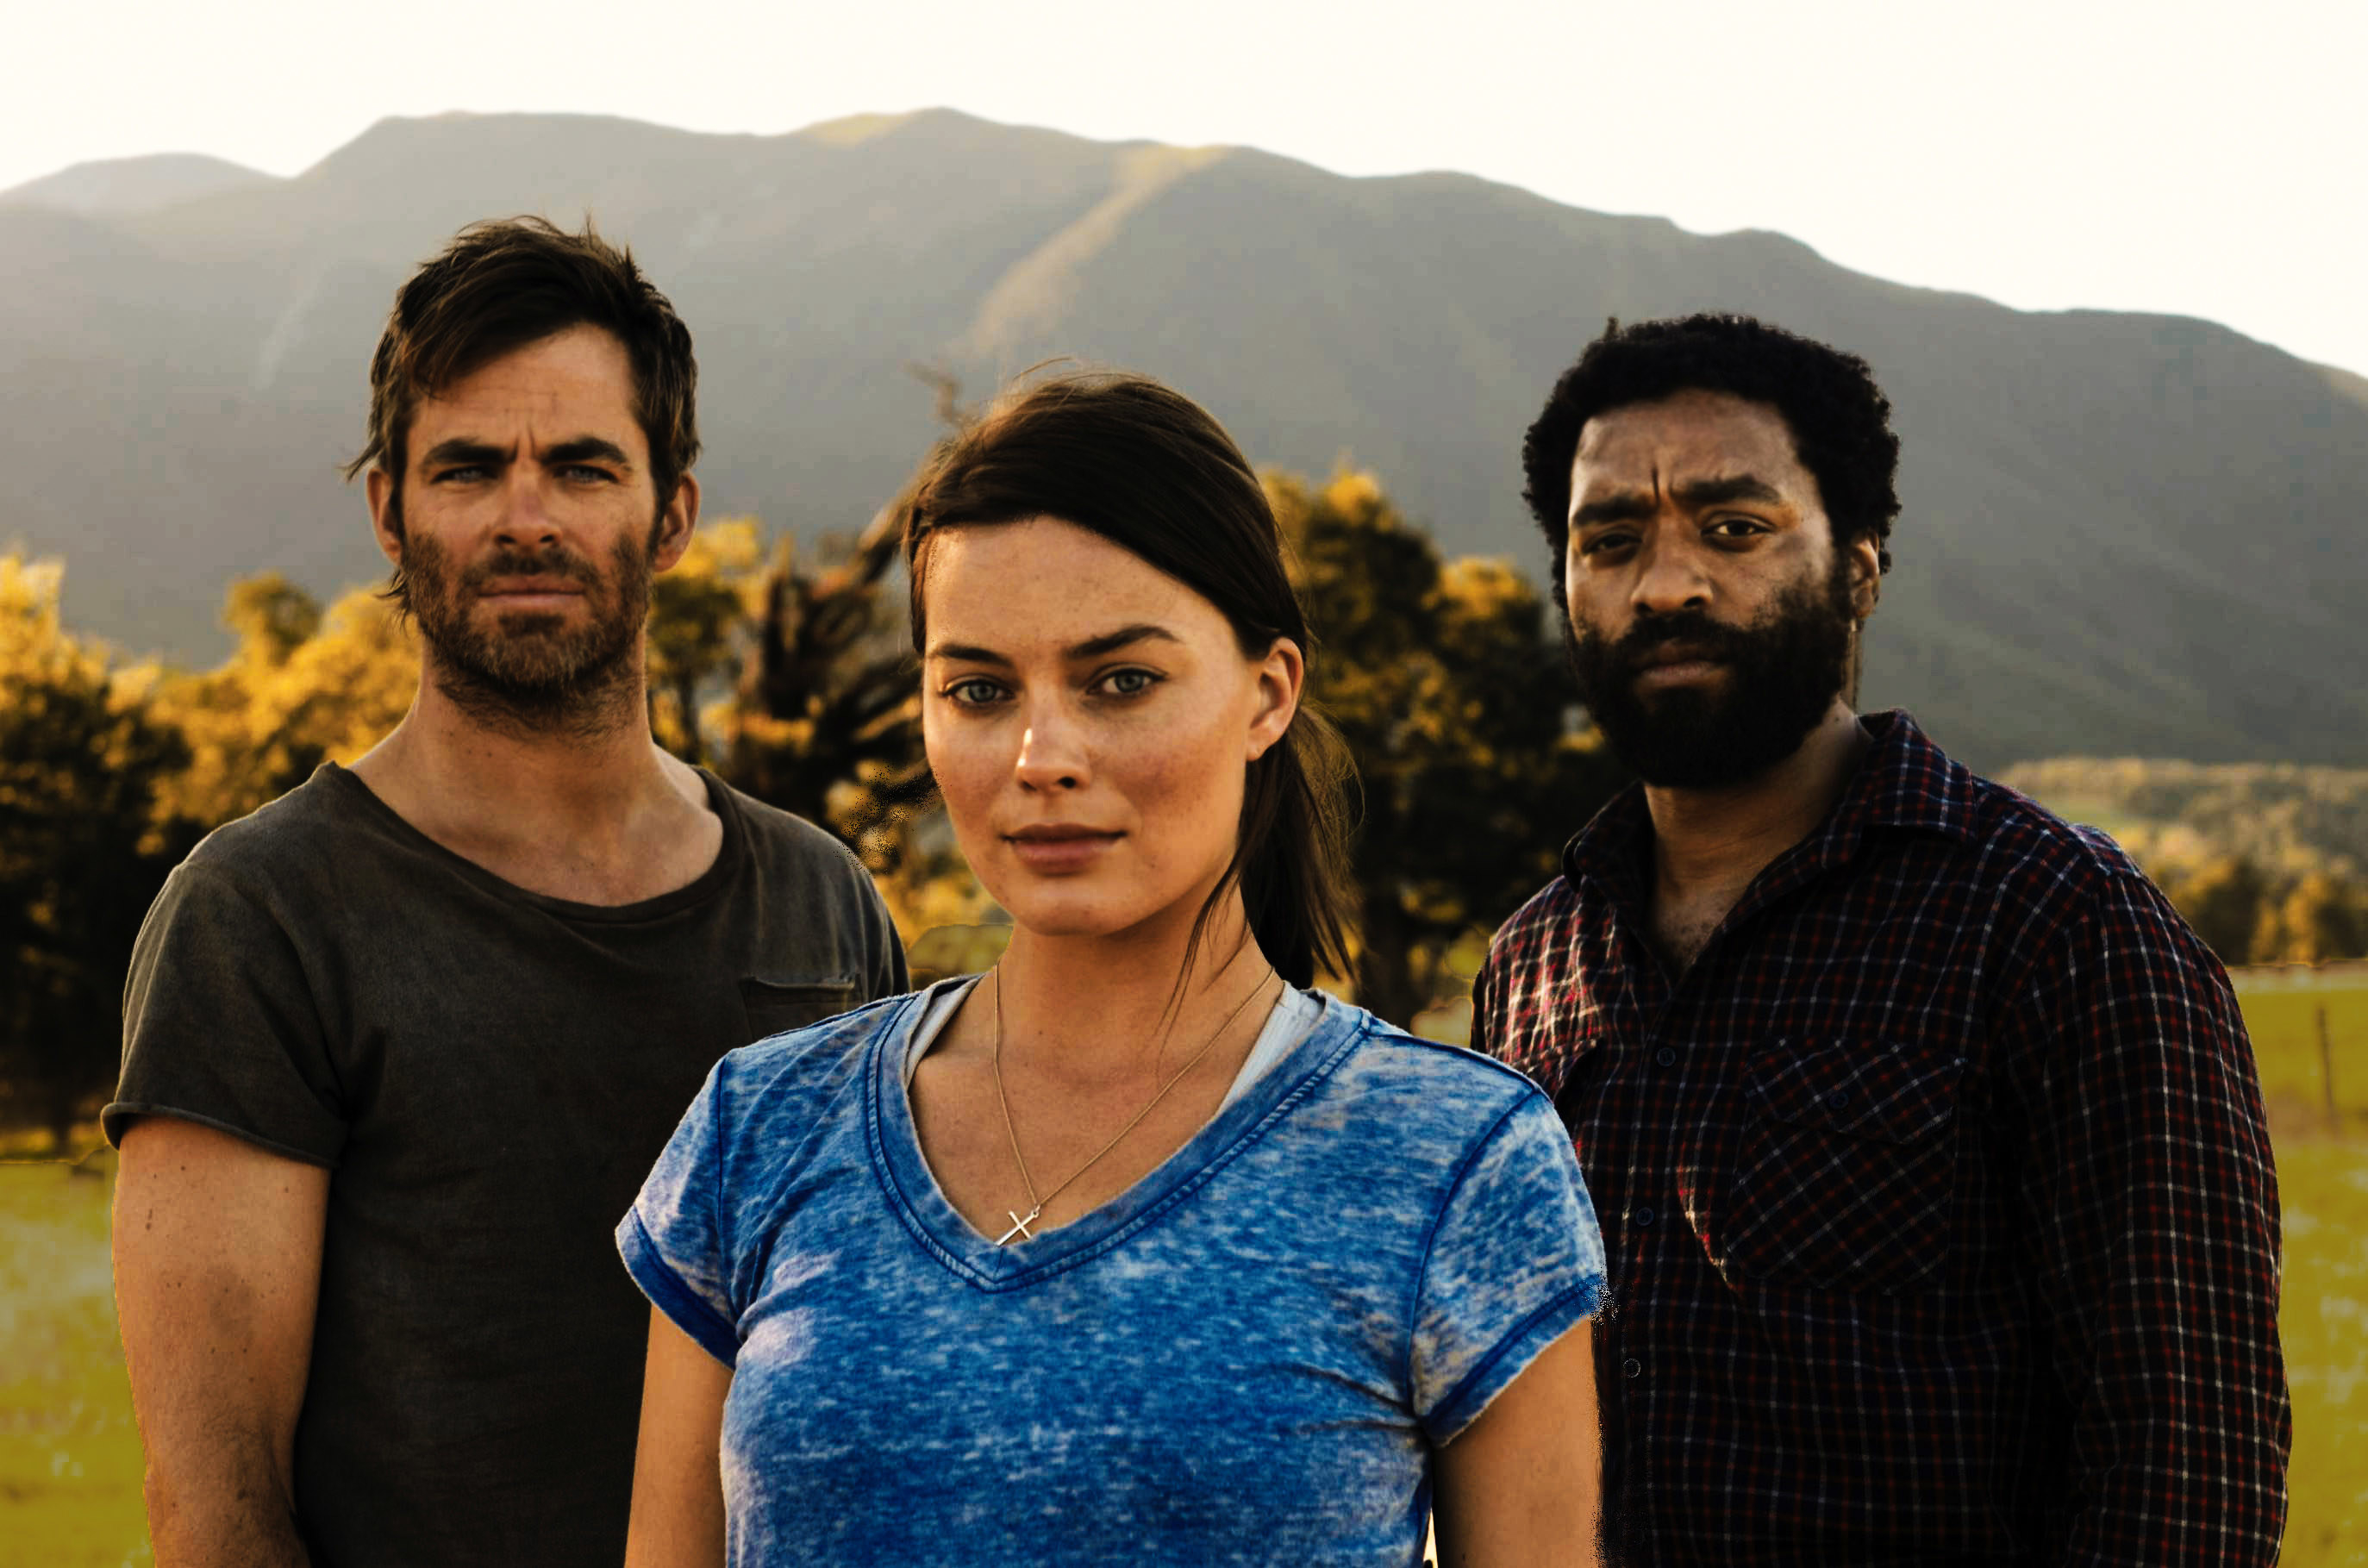 Chris Pine, Margot Robbie, and Chiwetel Ejiofor stand in a field